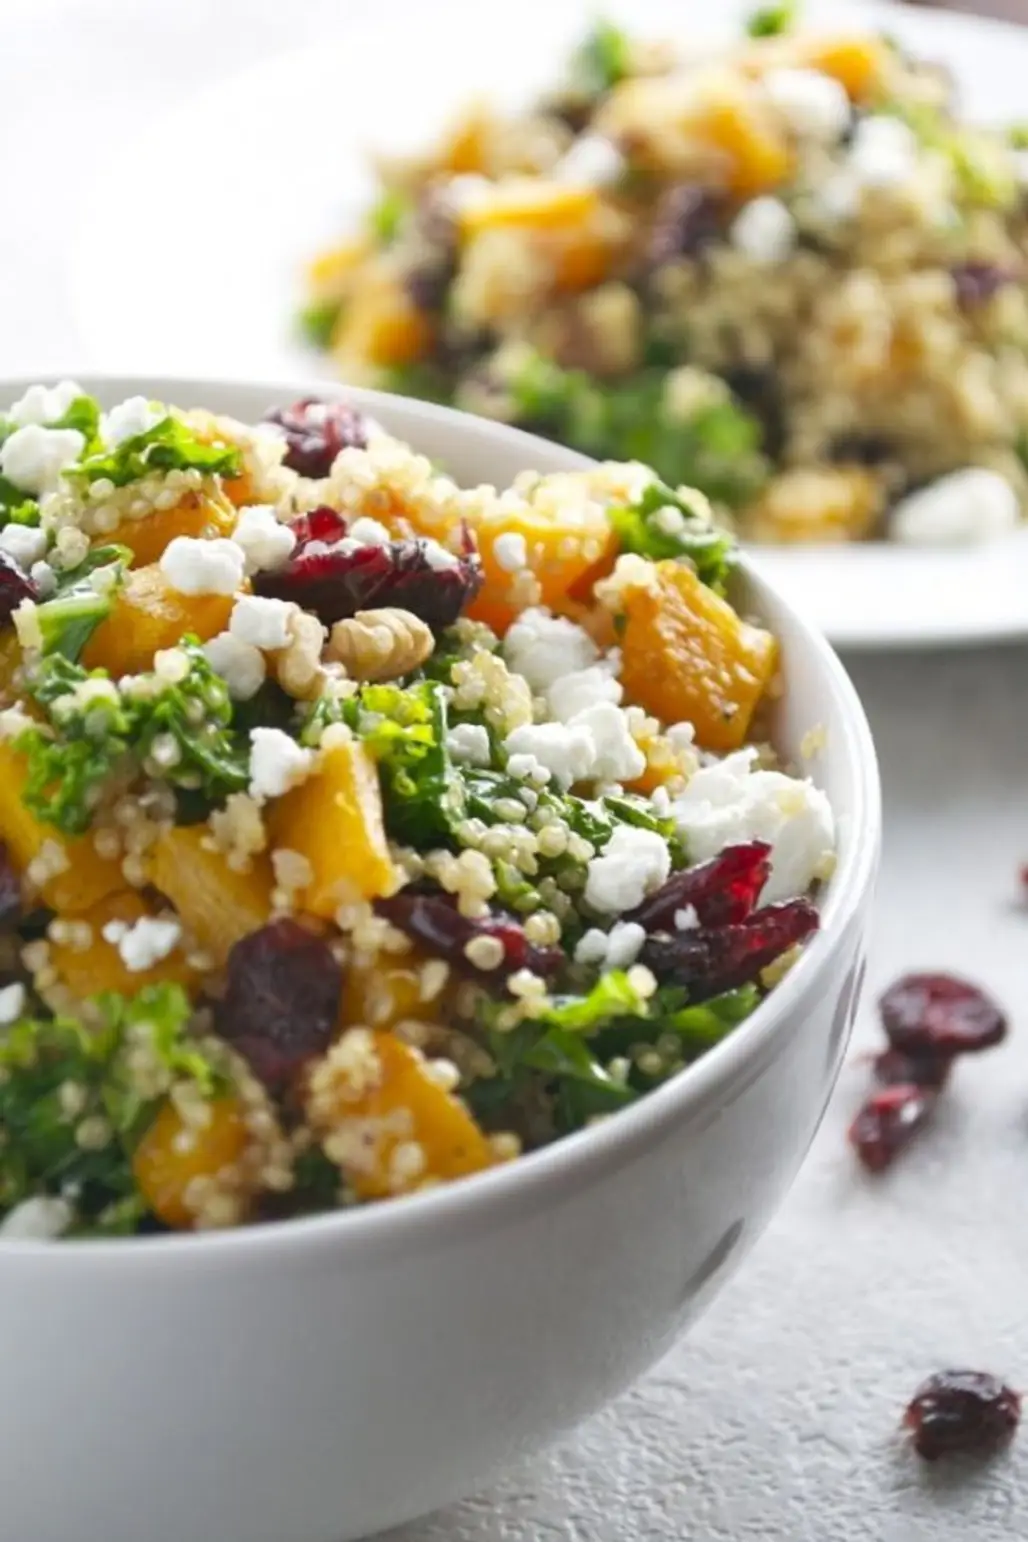 Butternut Squash Quinoa with Kale, Cranberries, Walnuts and Goat Cheese